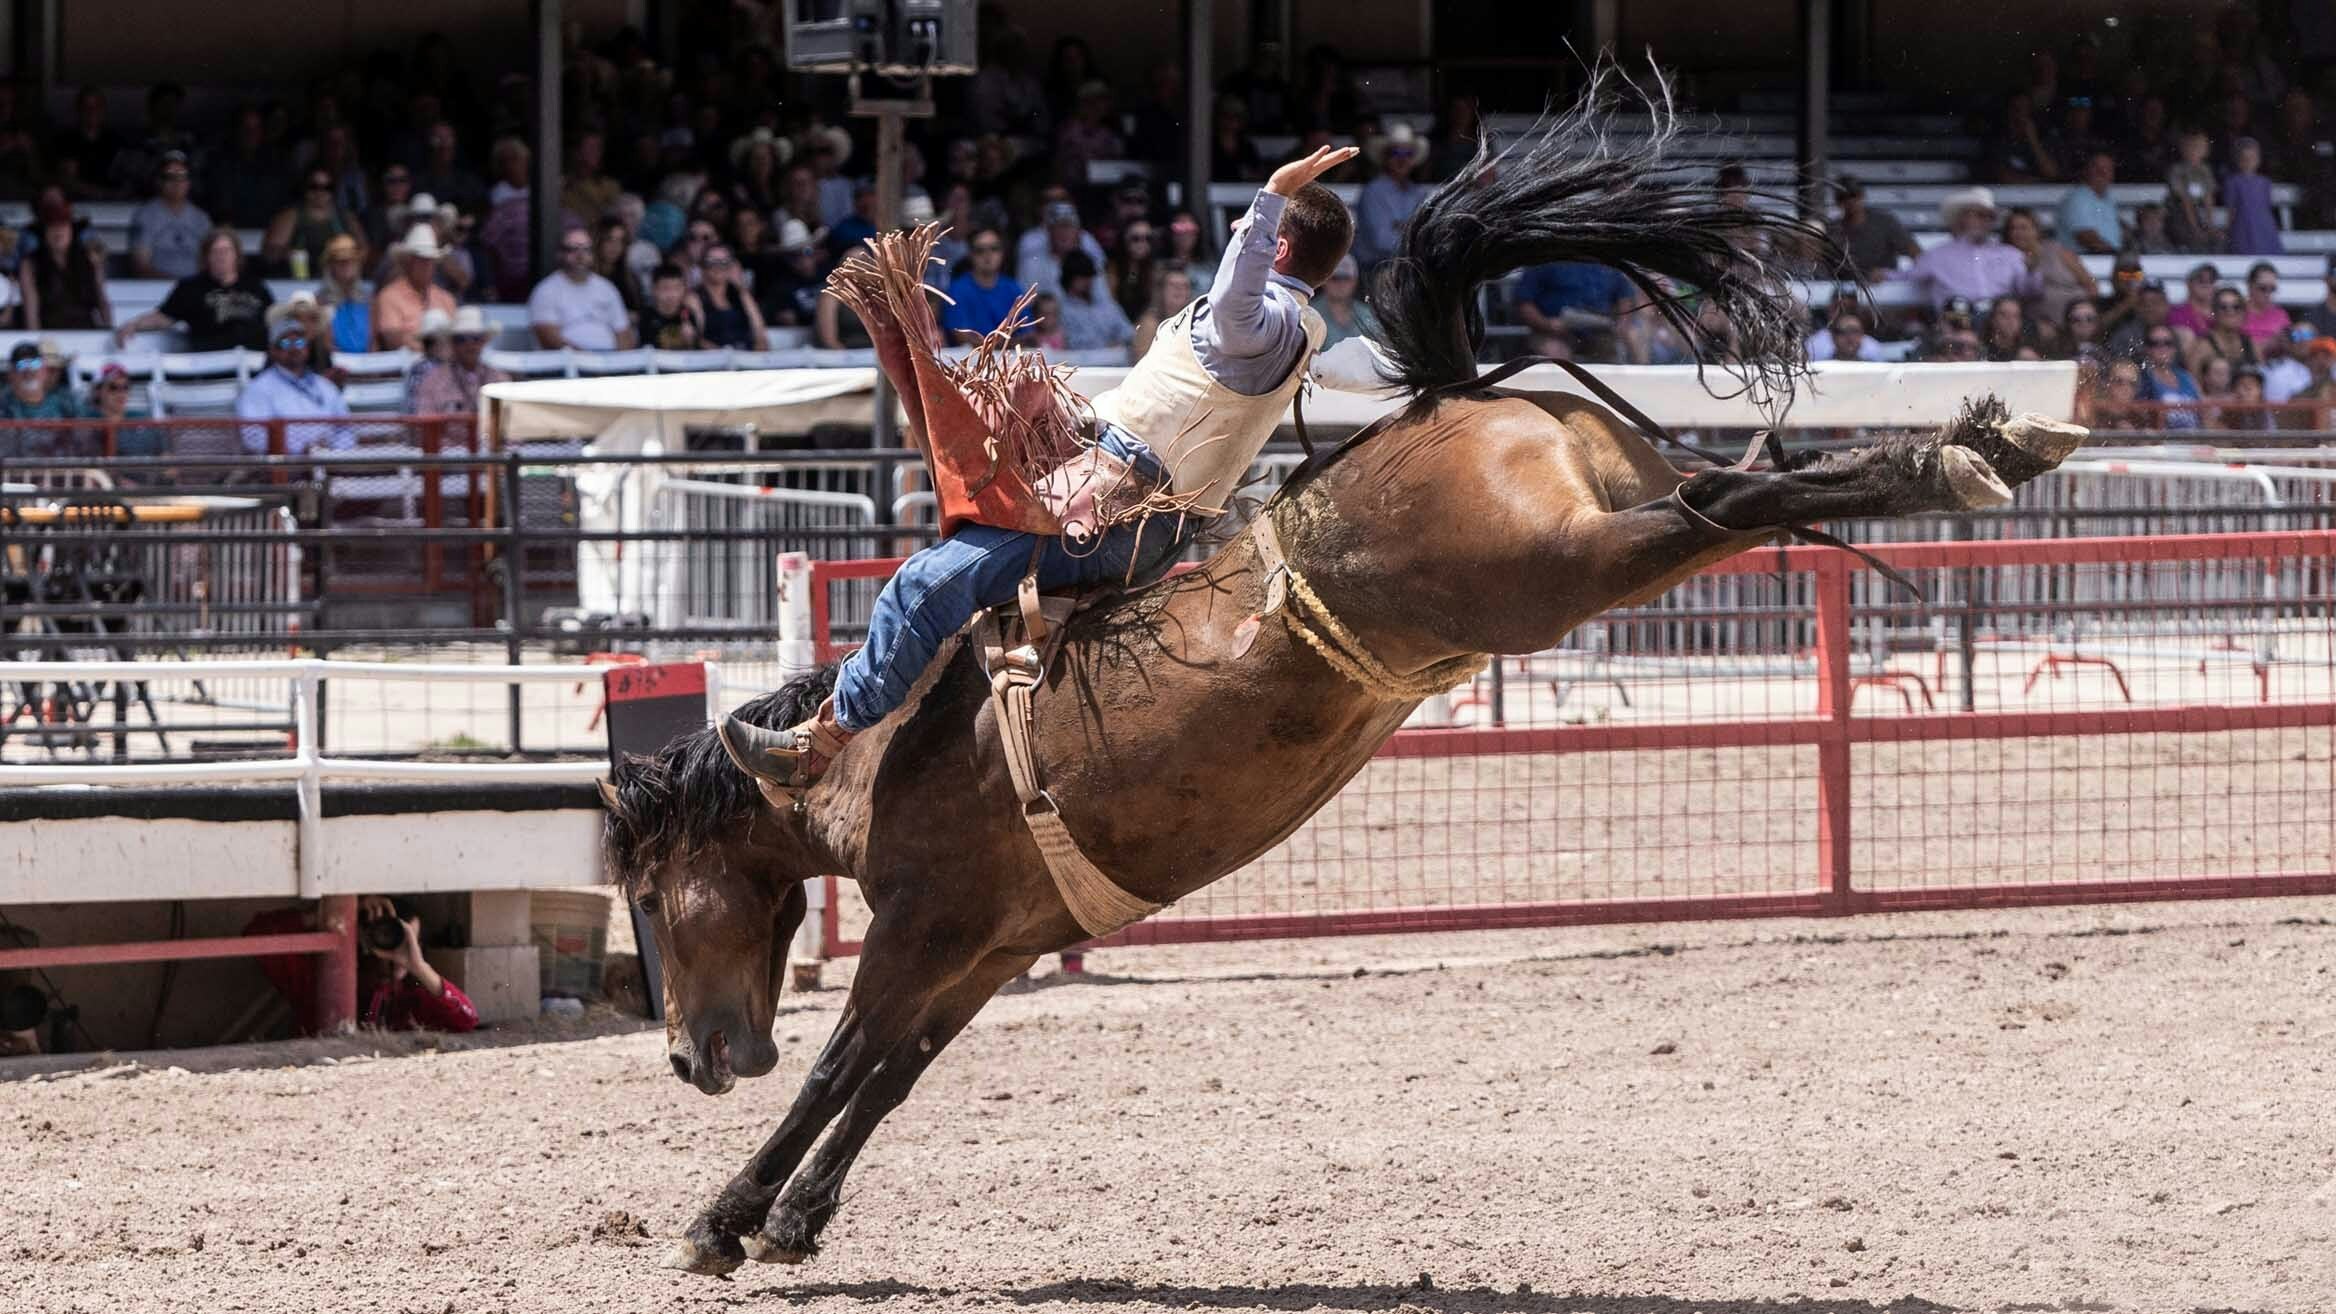 Bill Tutor from Huntsville, TX rides his horse for a score of 85 in the bareback riding at Cheyenne Frontier Days on July 25, 2023.